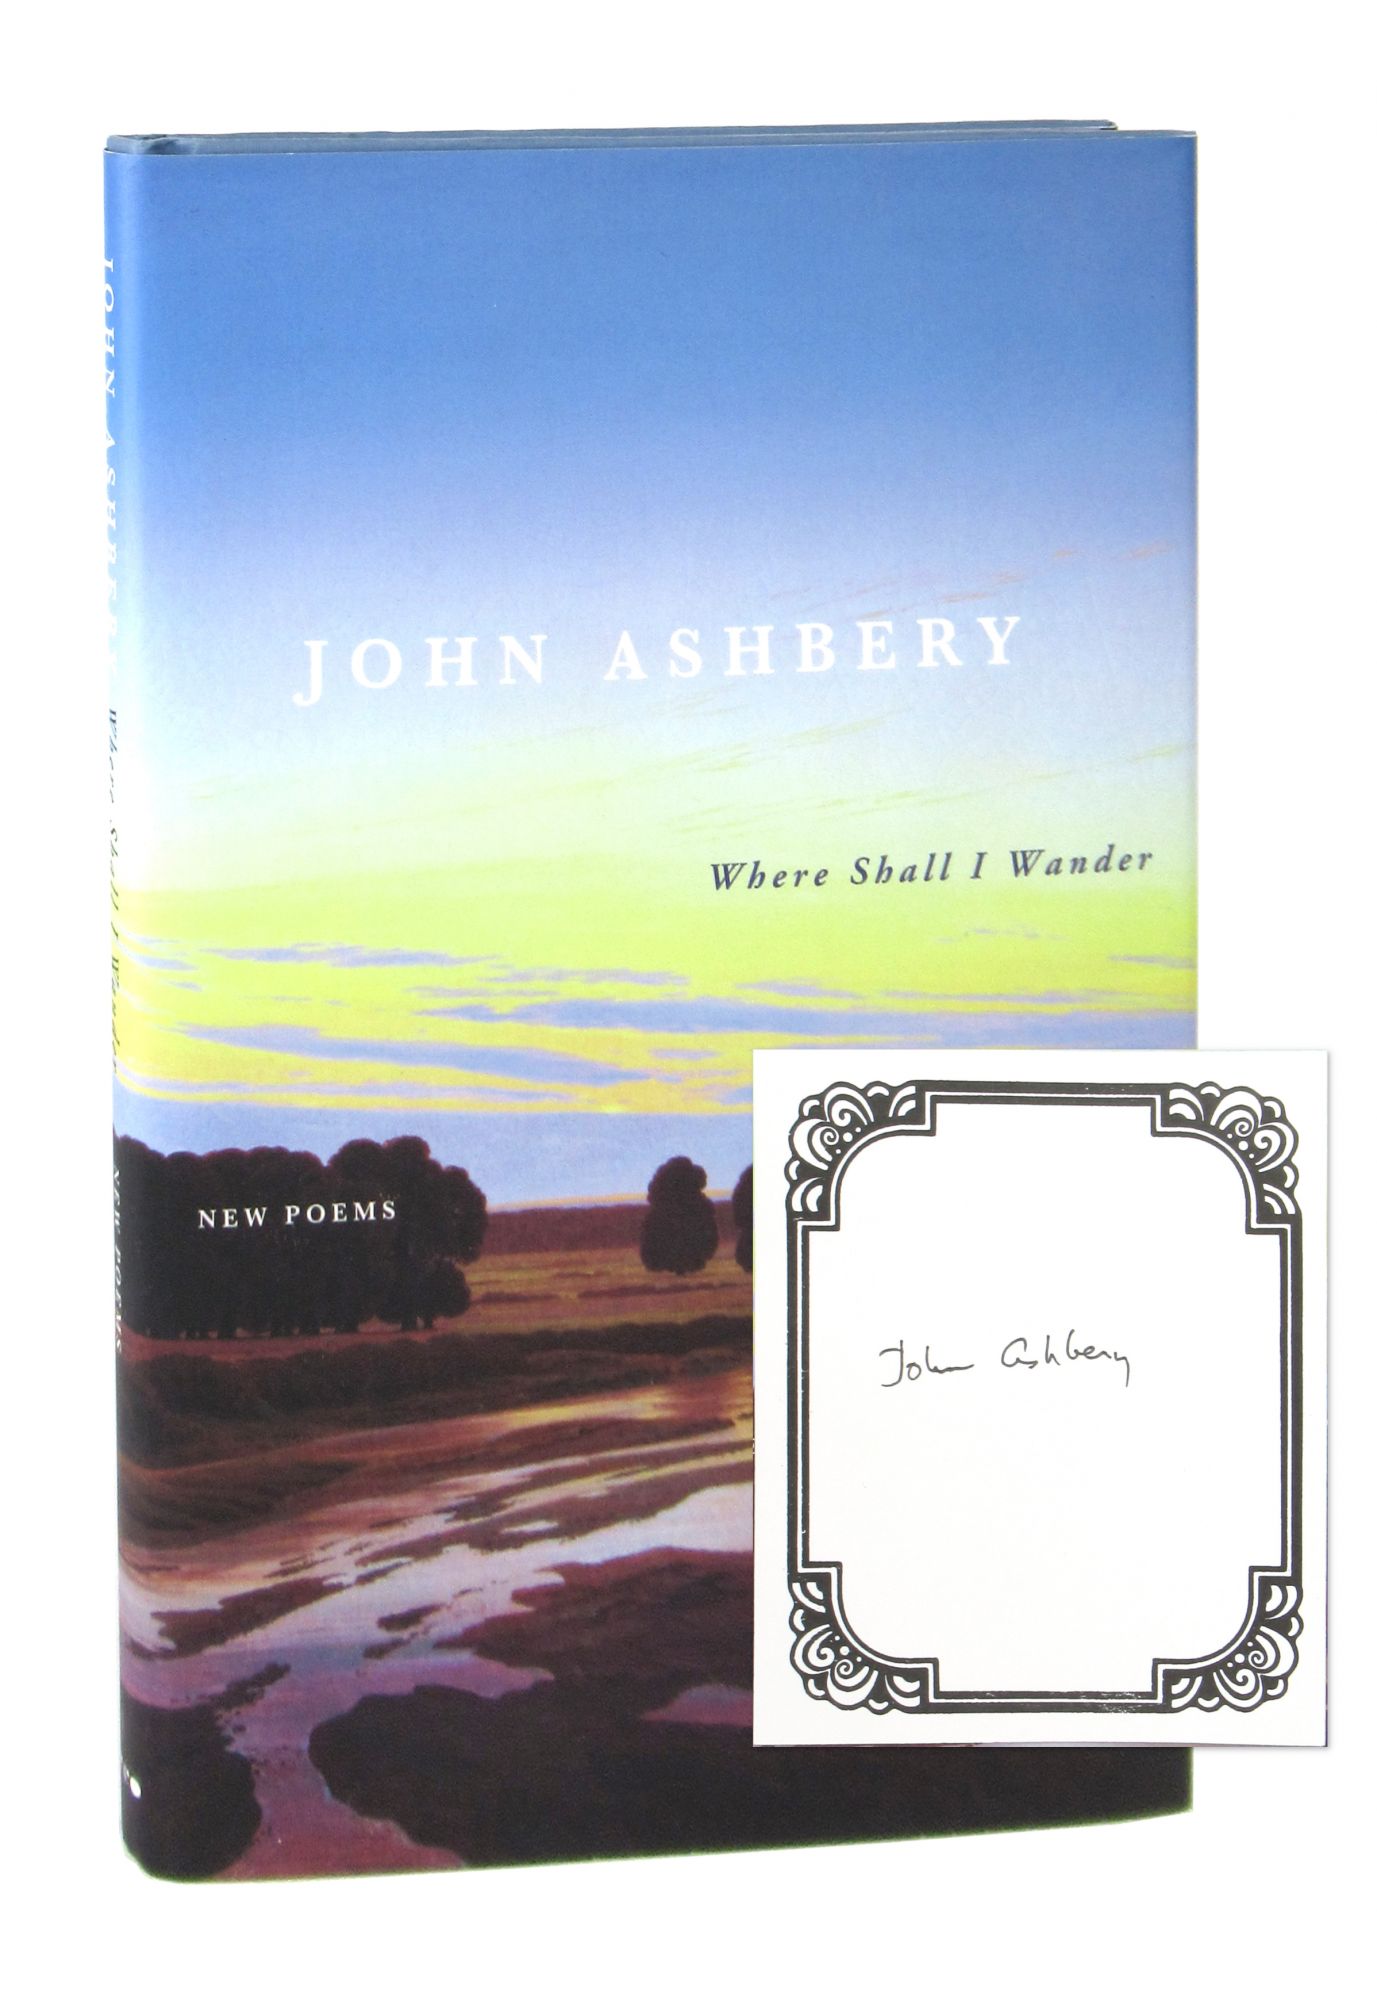 Author Signed Bookplate John Ashbery 